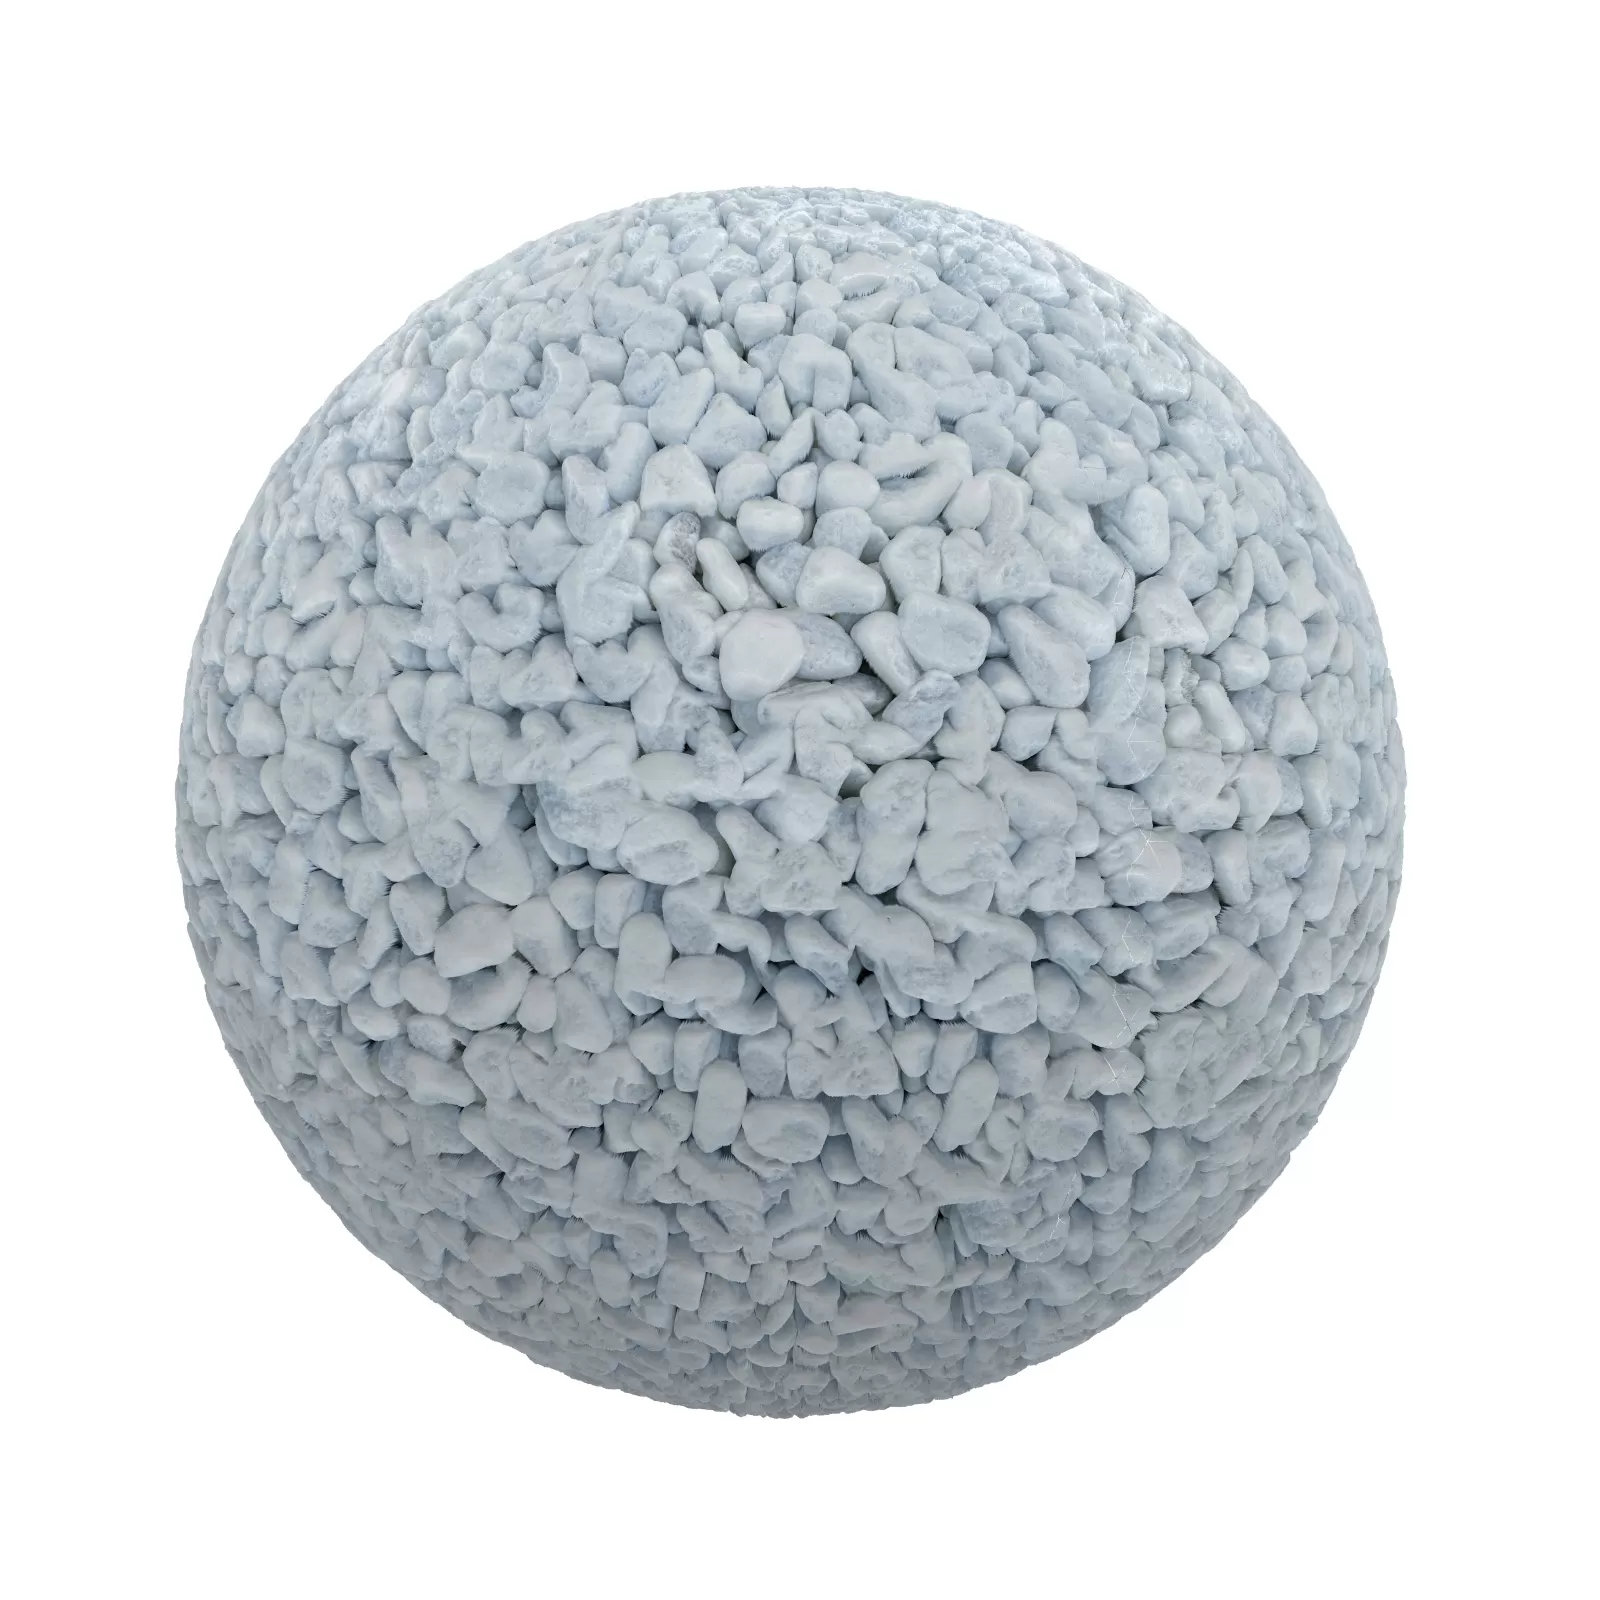 TEXTURES – STONES – CGAxis PBR Colection Vol 1 Stones – white pebbles